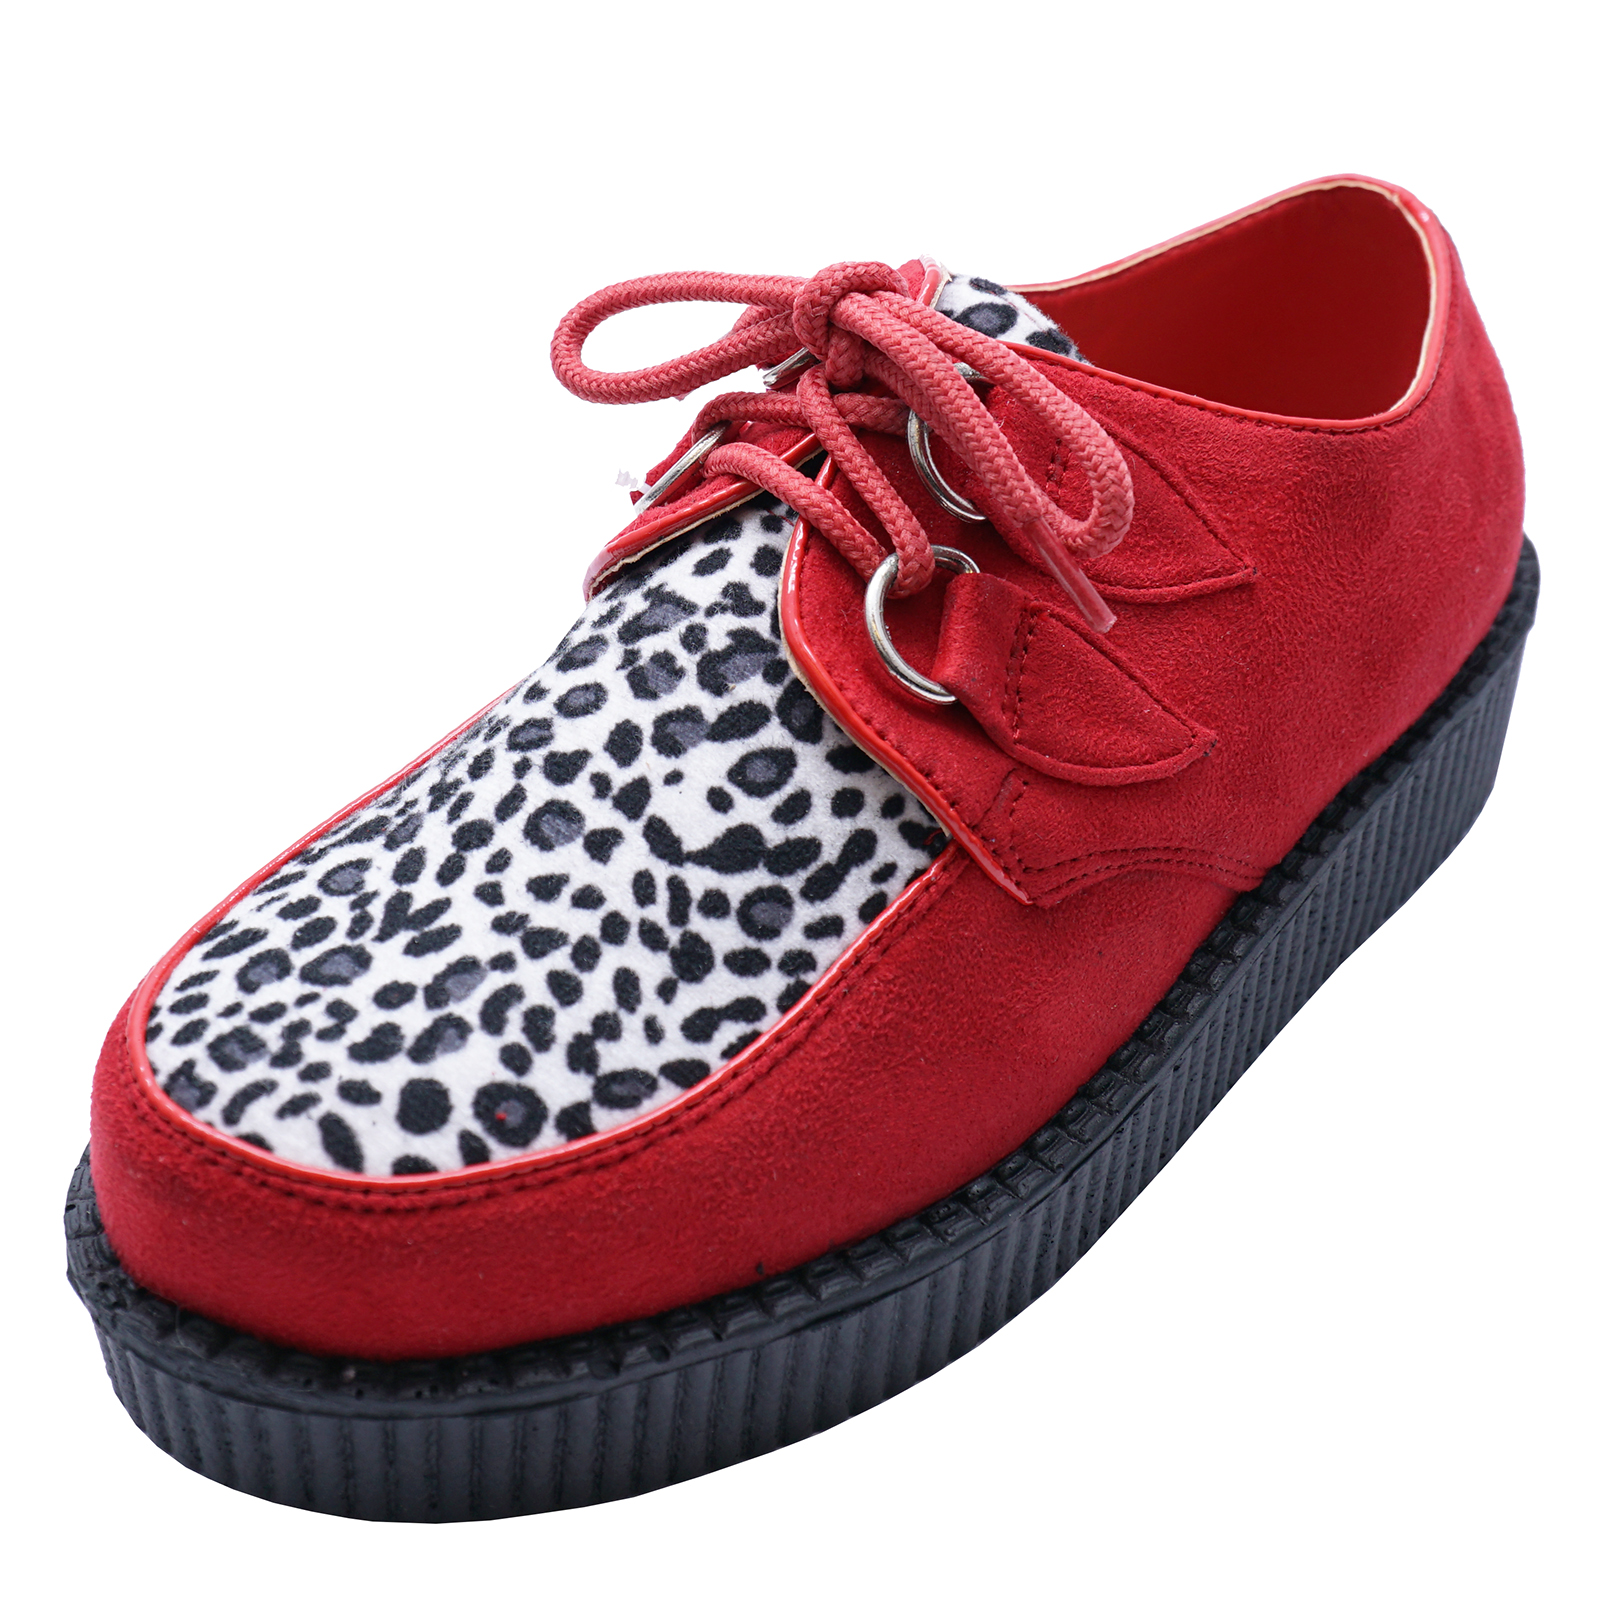 LADIES RED LACE-UP CREEPER BROGUES 